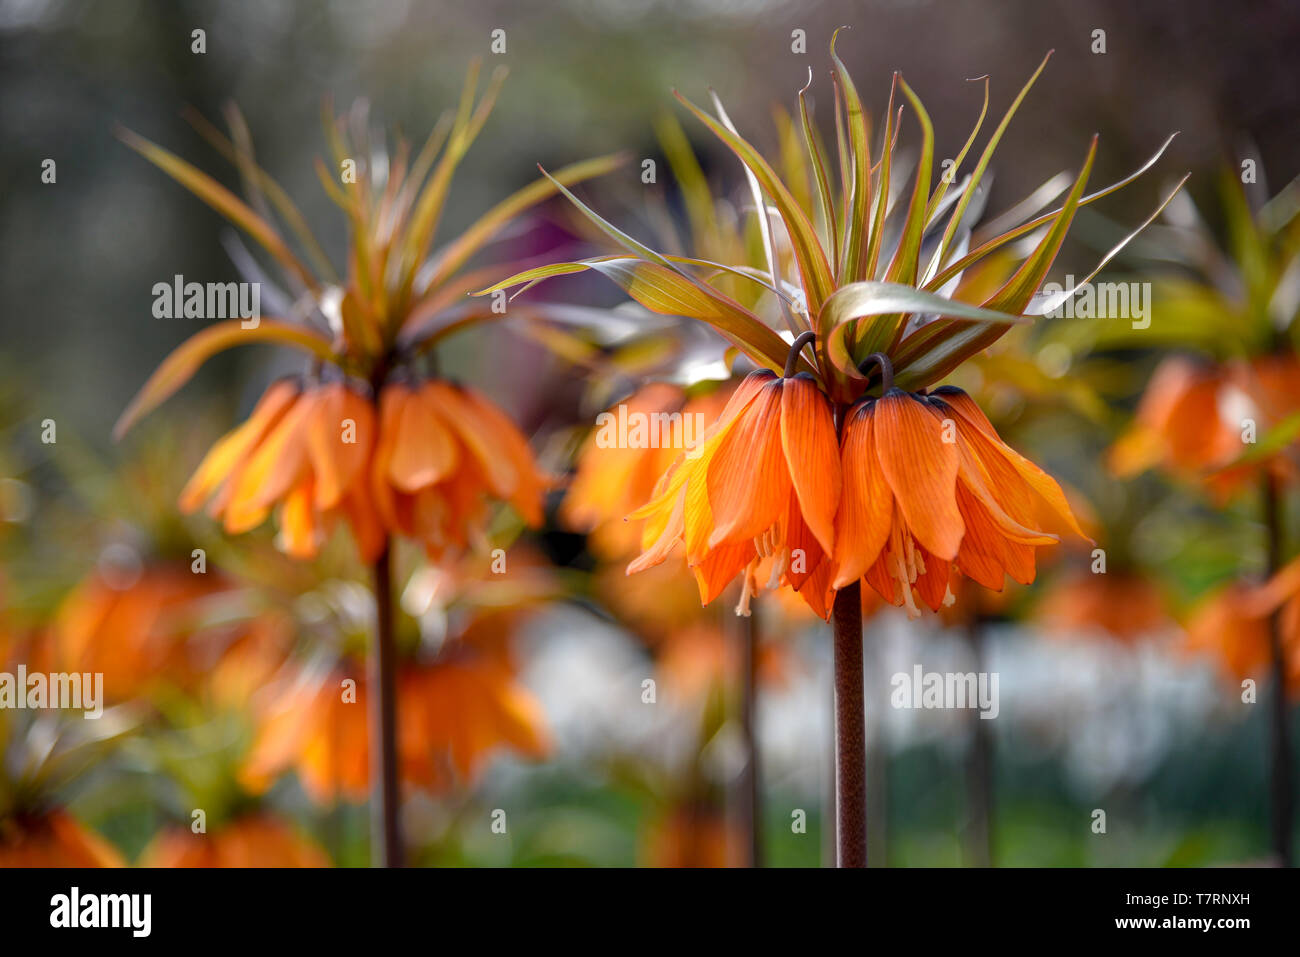 Orange Crown Imperial flowers against a blur flower background under a sunny day light Stock Photo